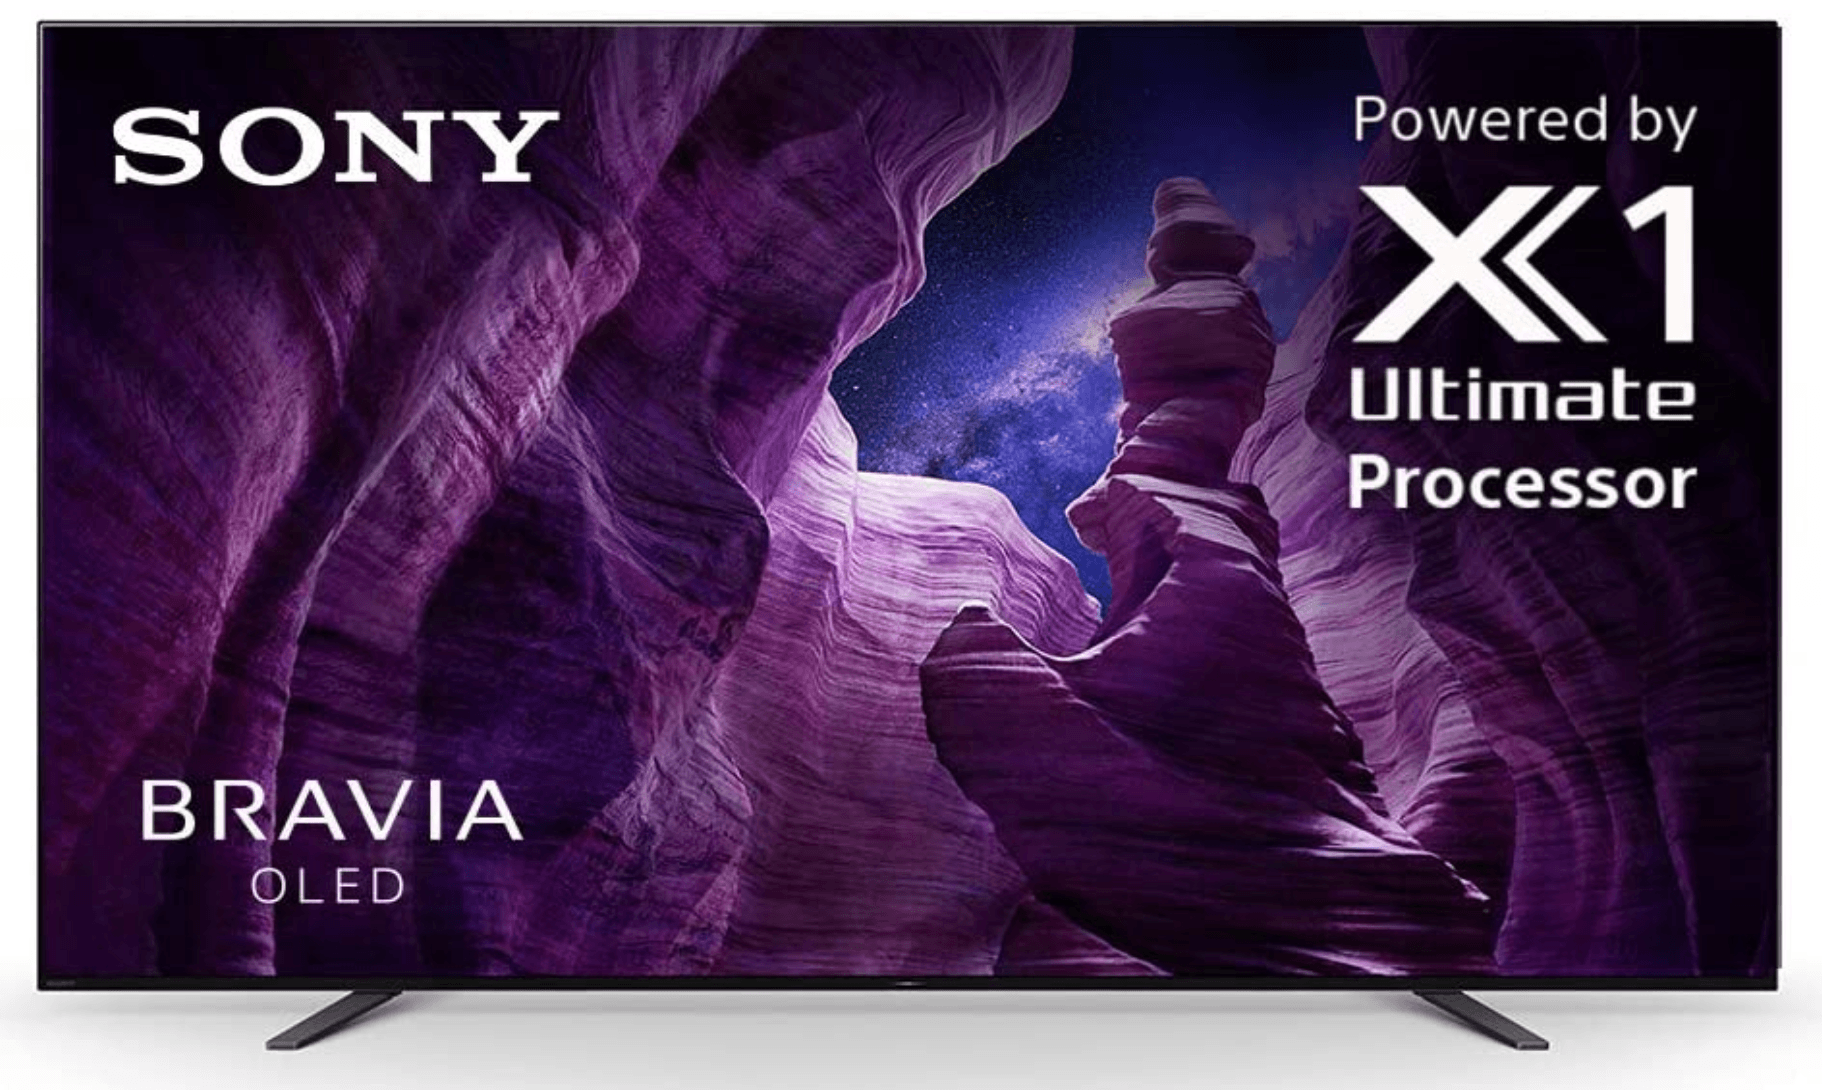 Enter to Win A New Sony Bravia Smart TV and Digital Antenna in Time For Super Bowl Sunday